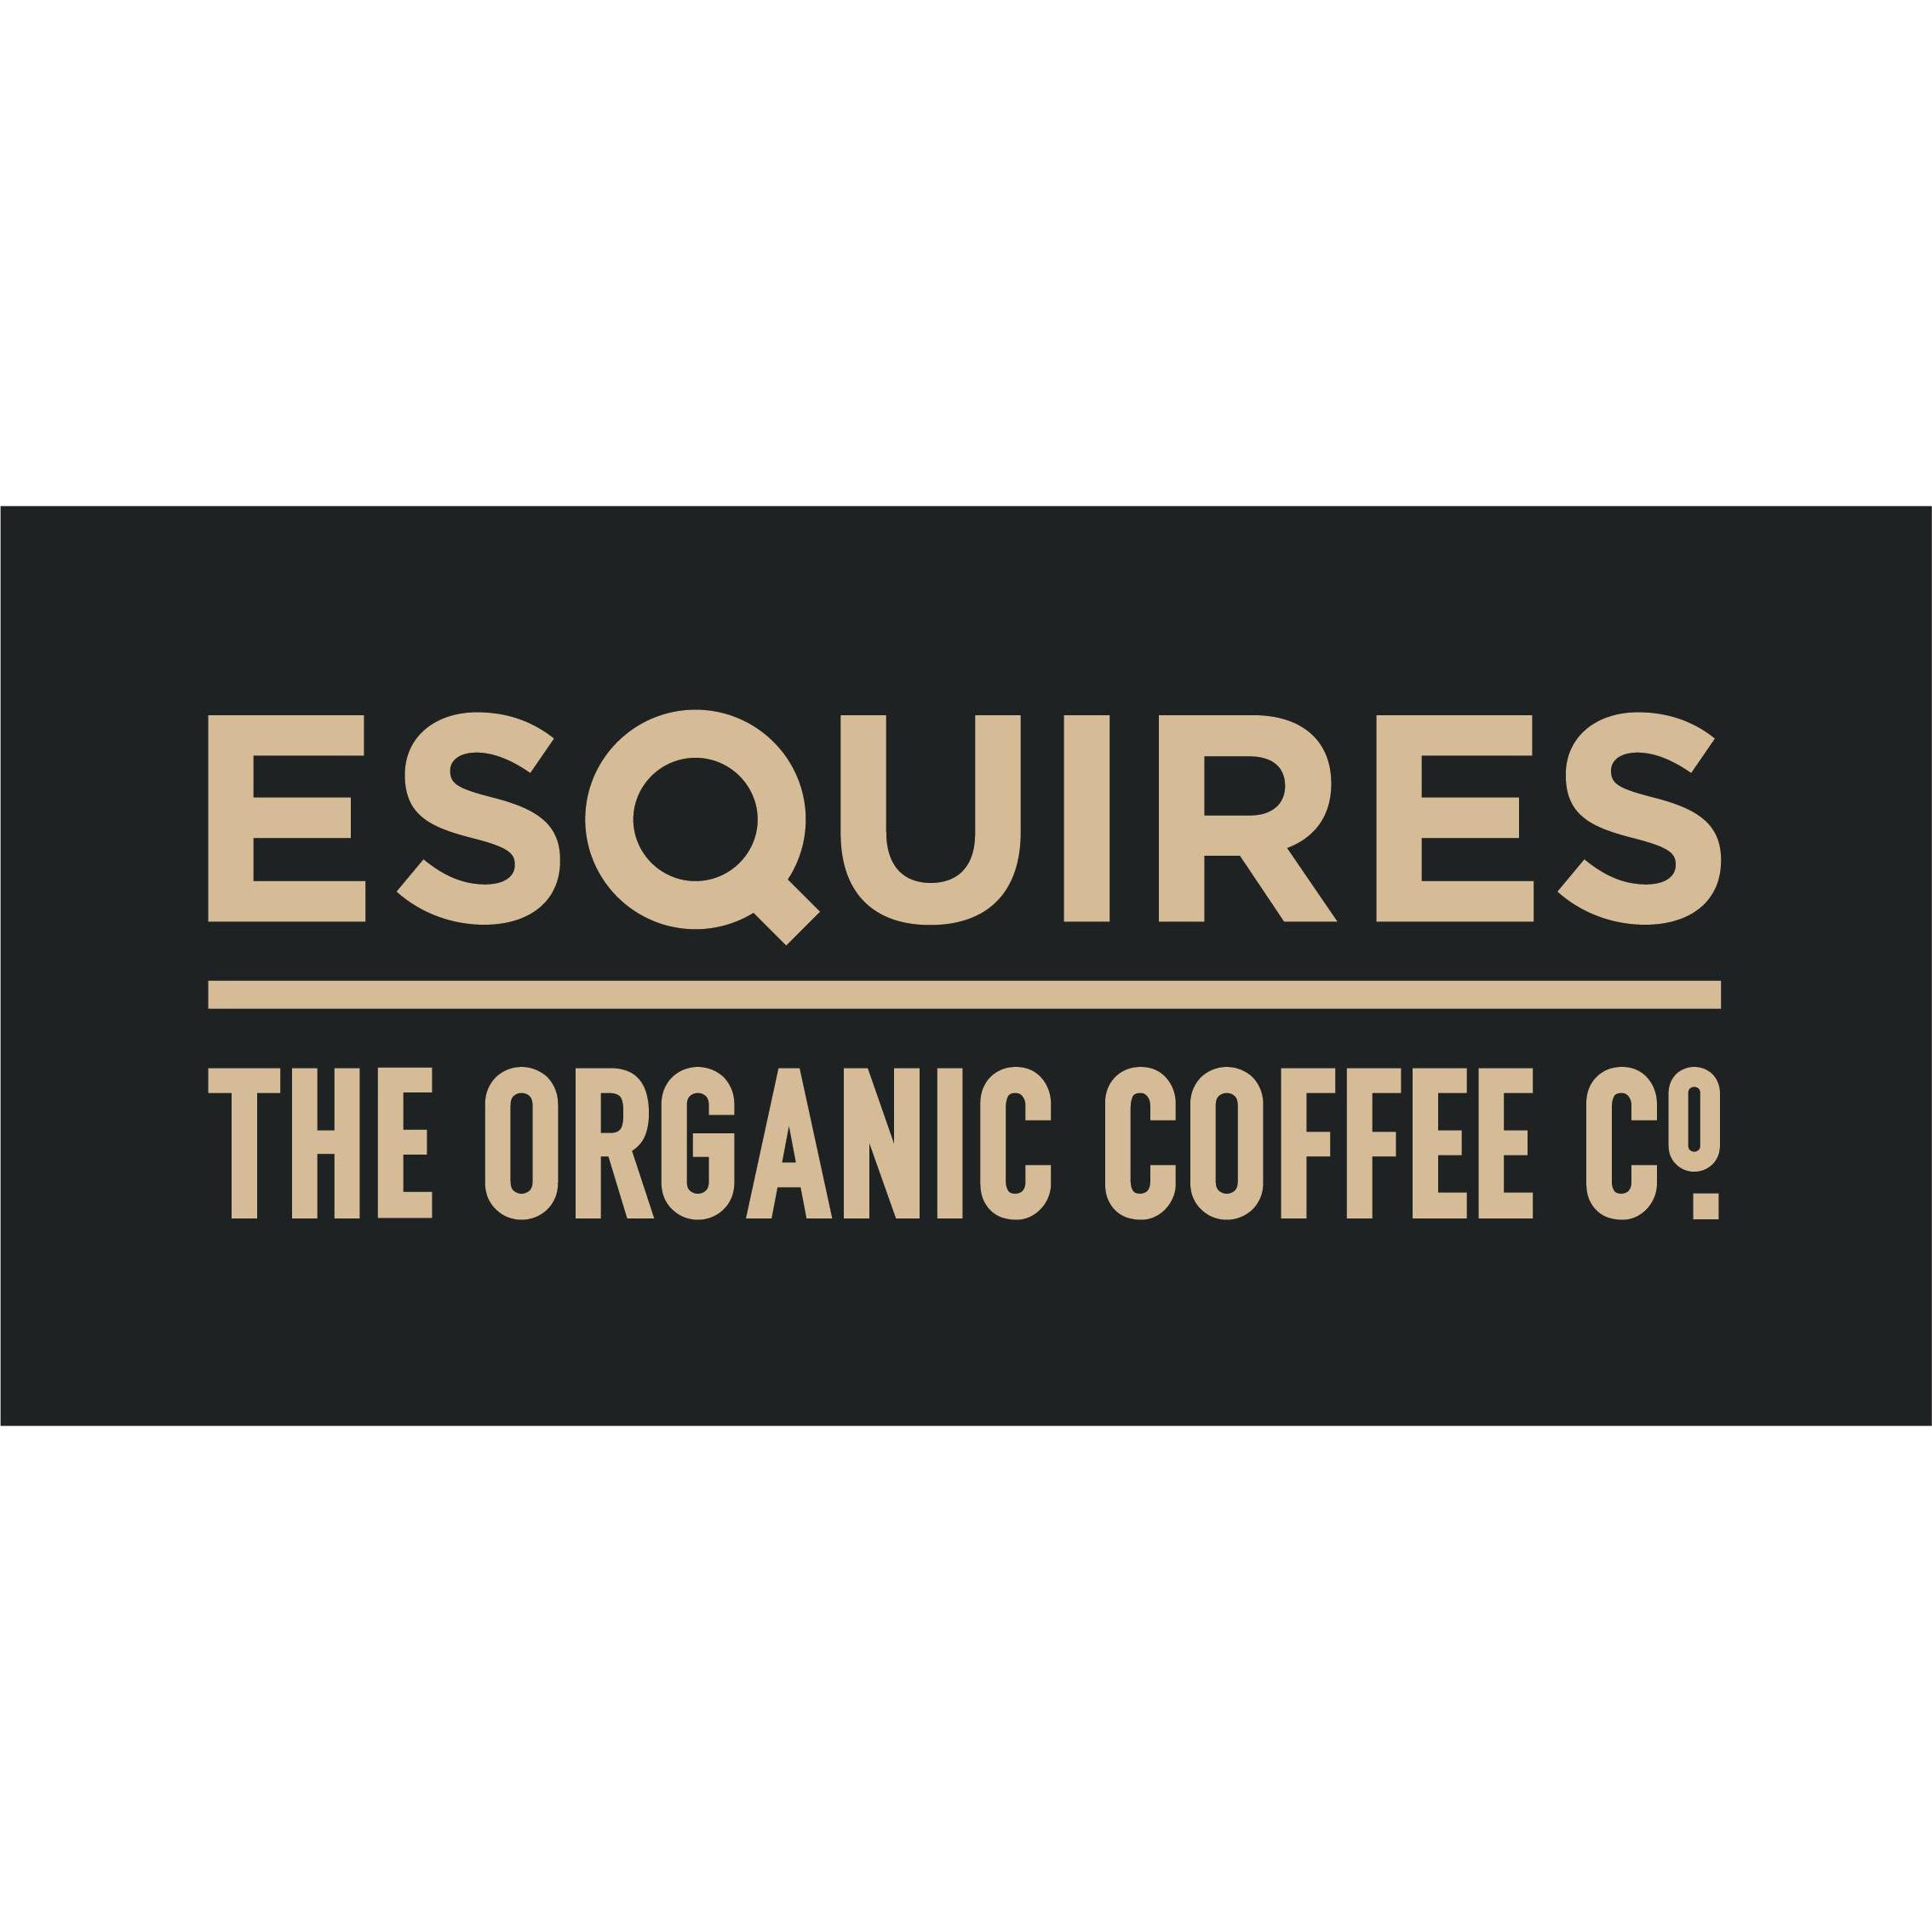 Esquires Coffee Kettering - Kettering, Northamptonshire NN16 8JA - 01536 802703 | ShowMeLocal.com